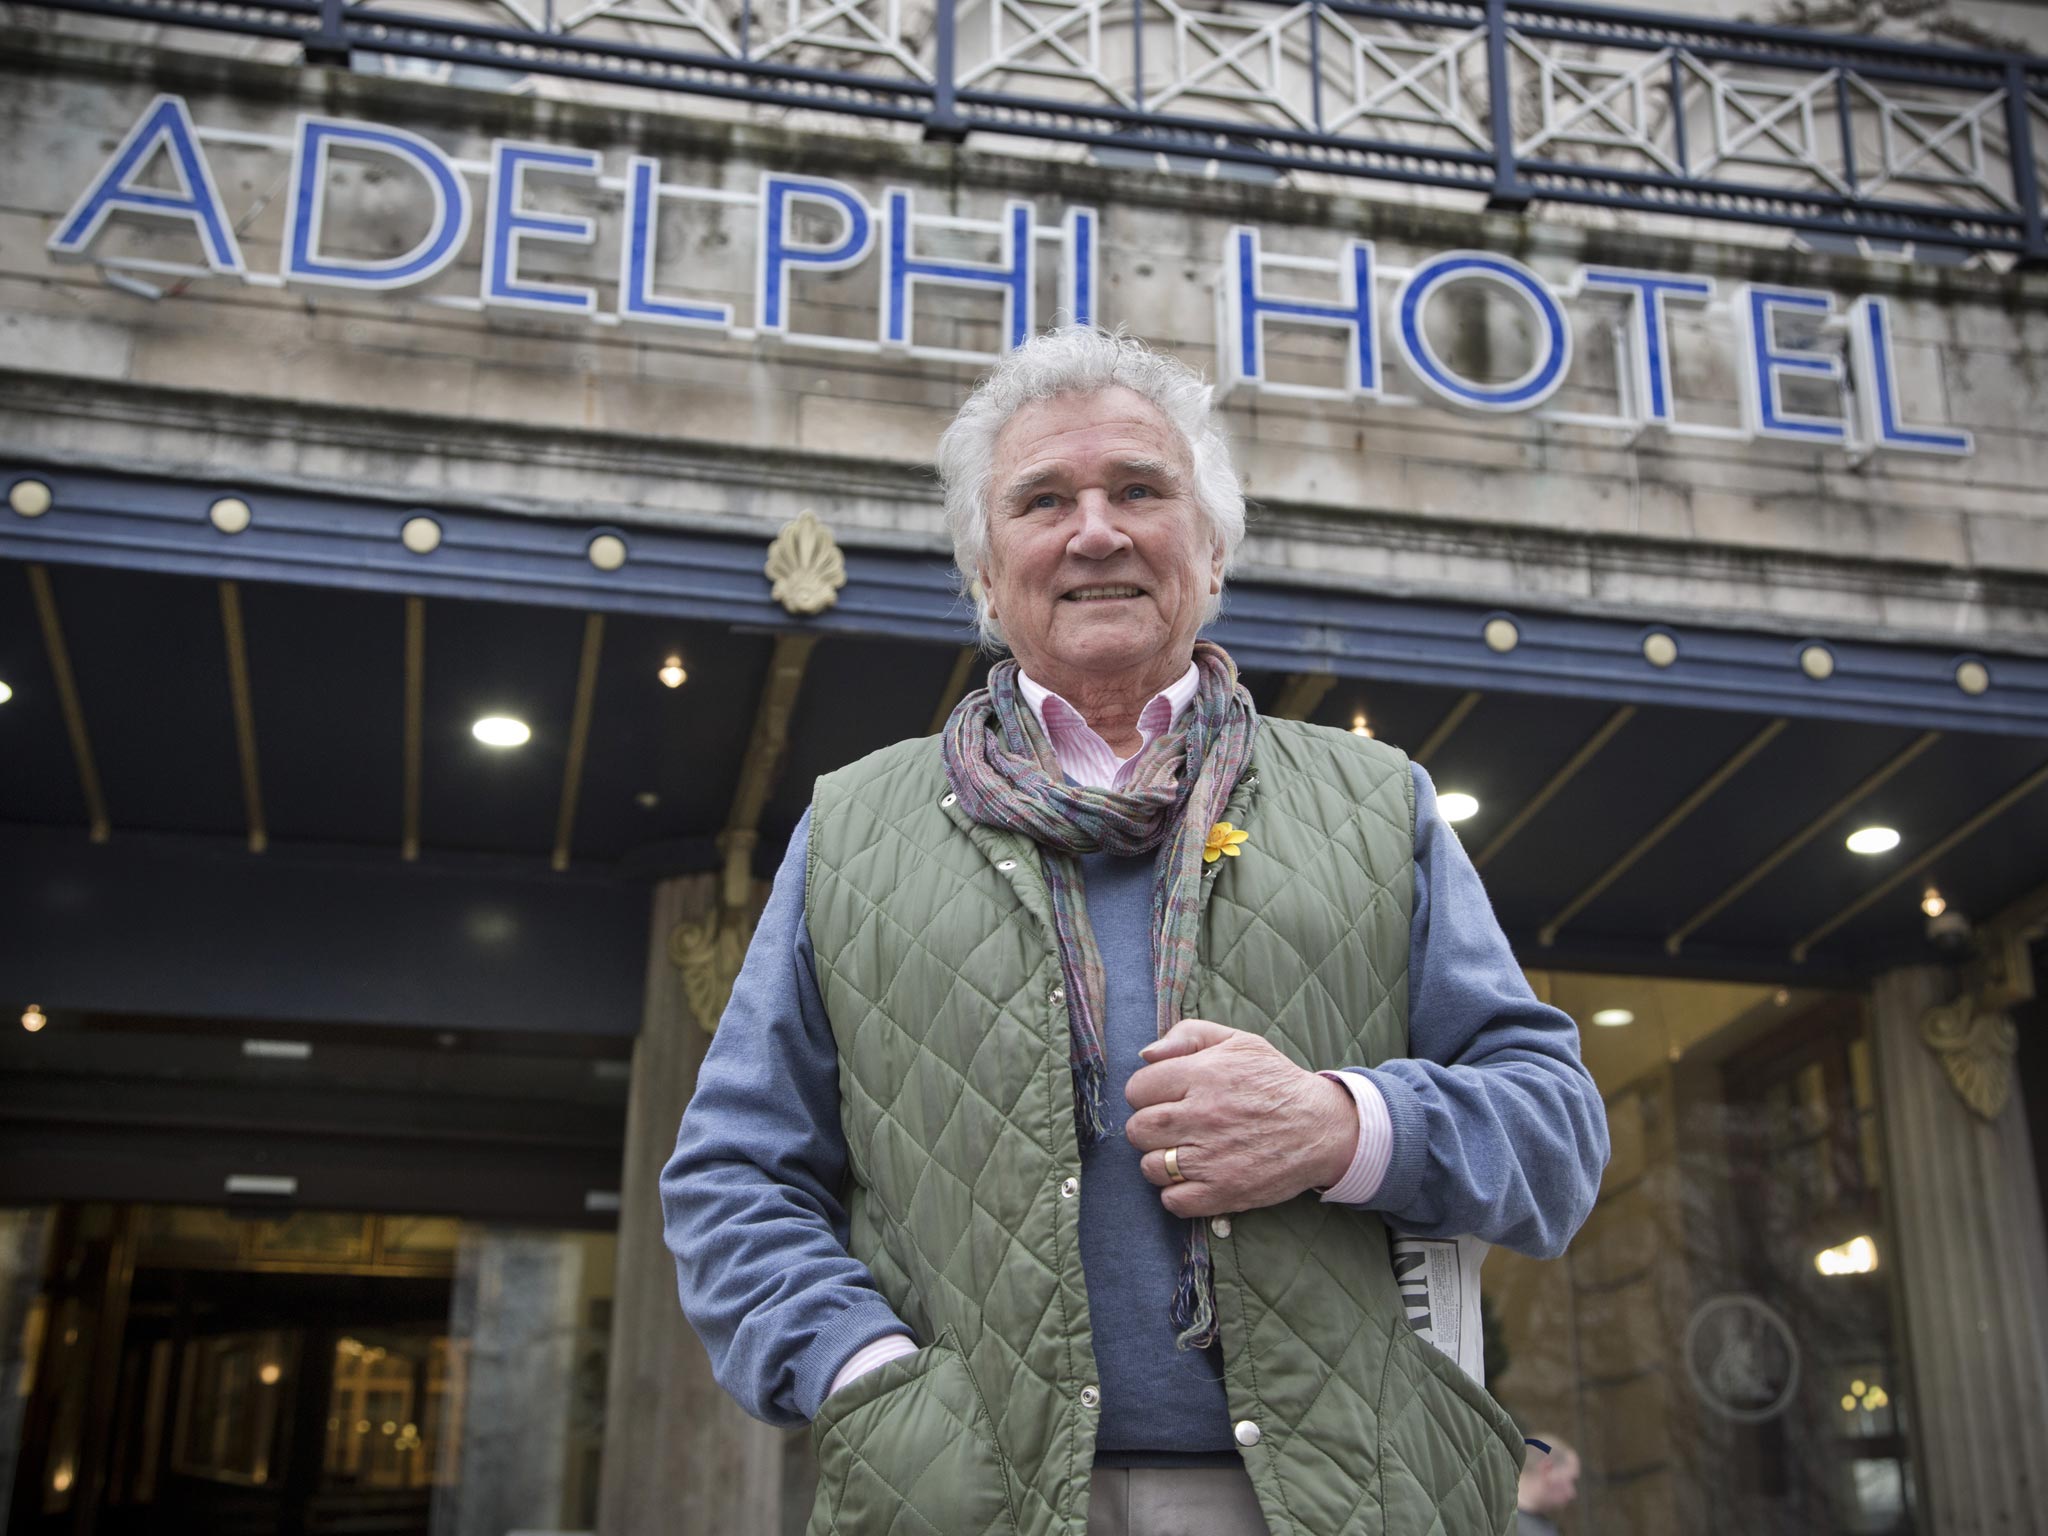 Jim Beaumont, pictured at the Adelphi Hotel in his native Liverpool